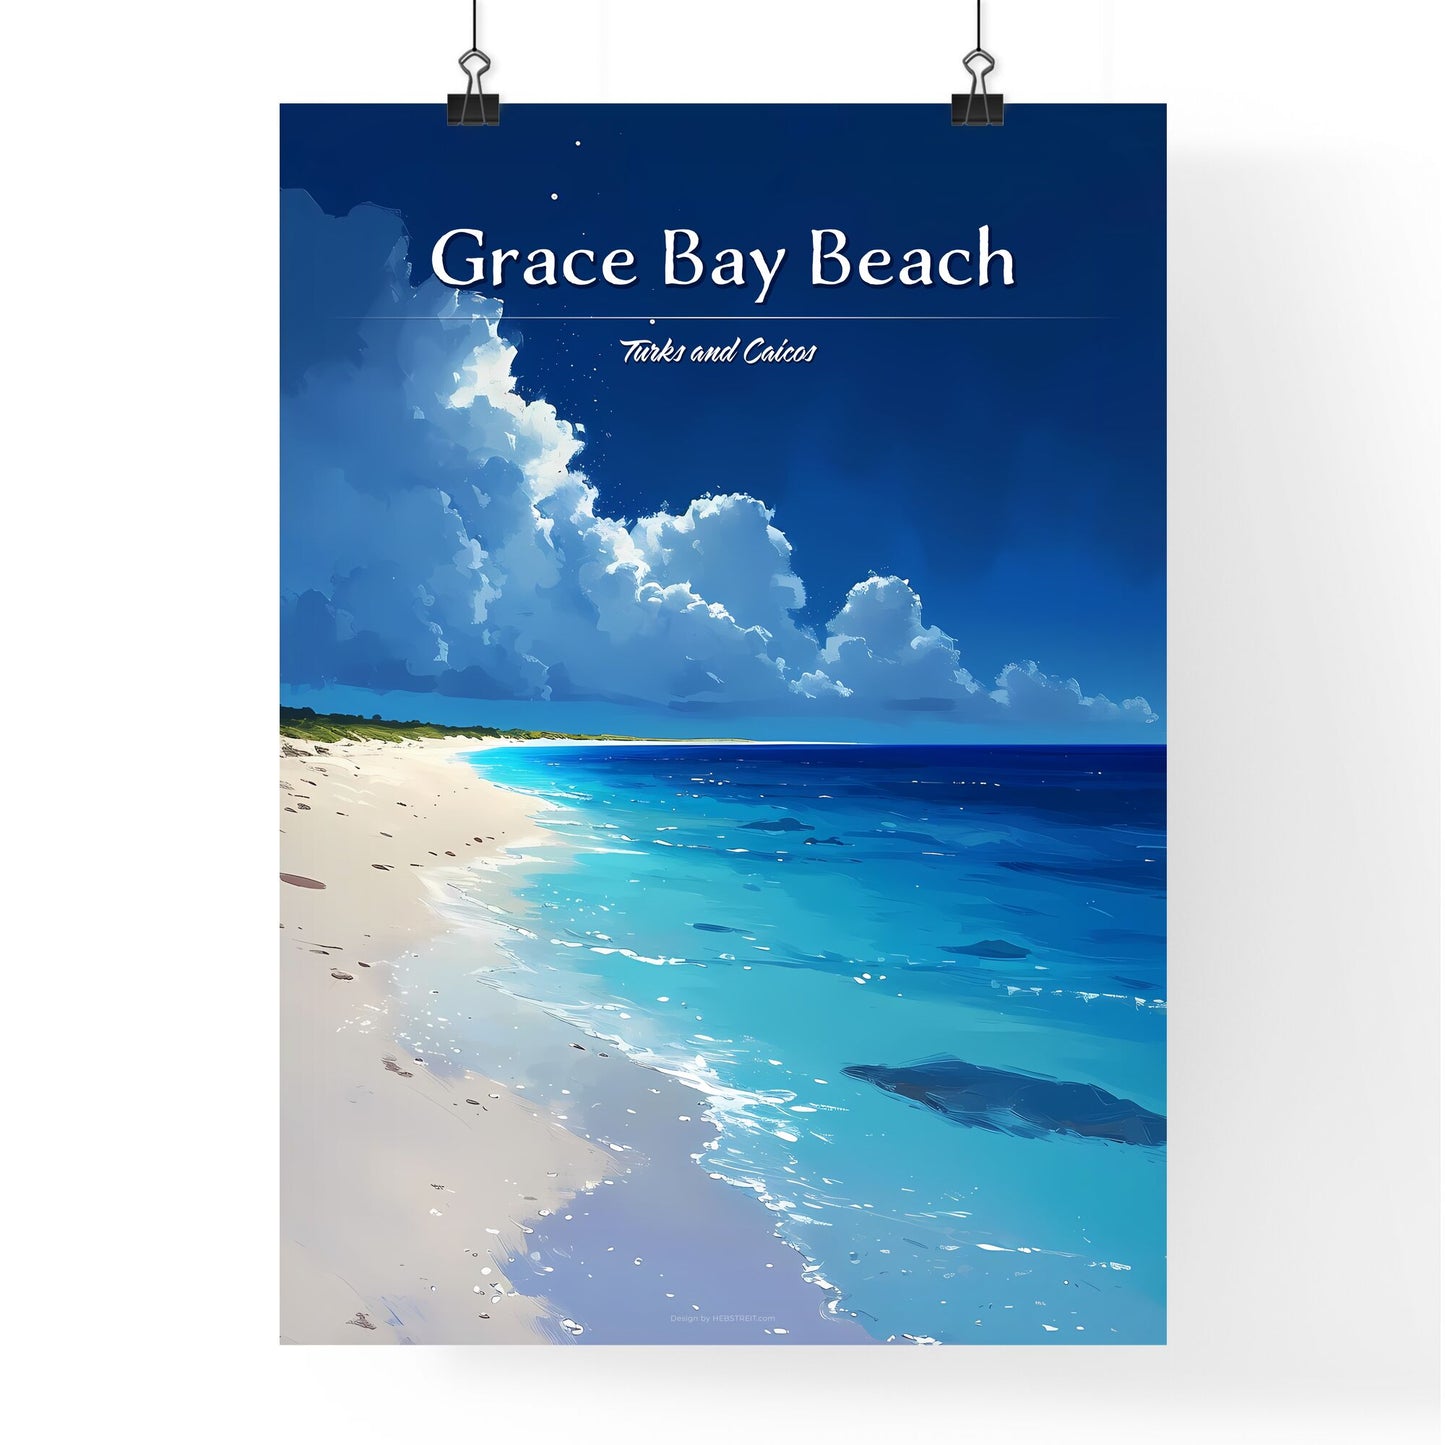 Grace Bay Beach, Turks and Caicos - Art print of a beach with blue water and clouds Default Title